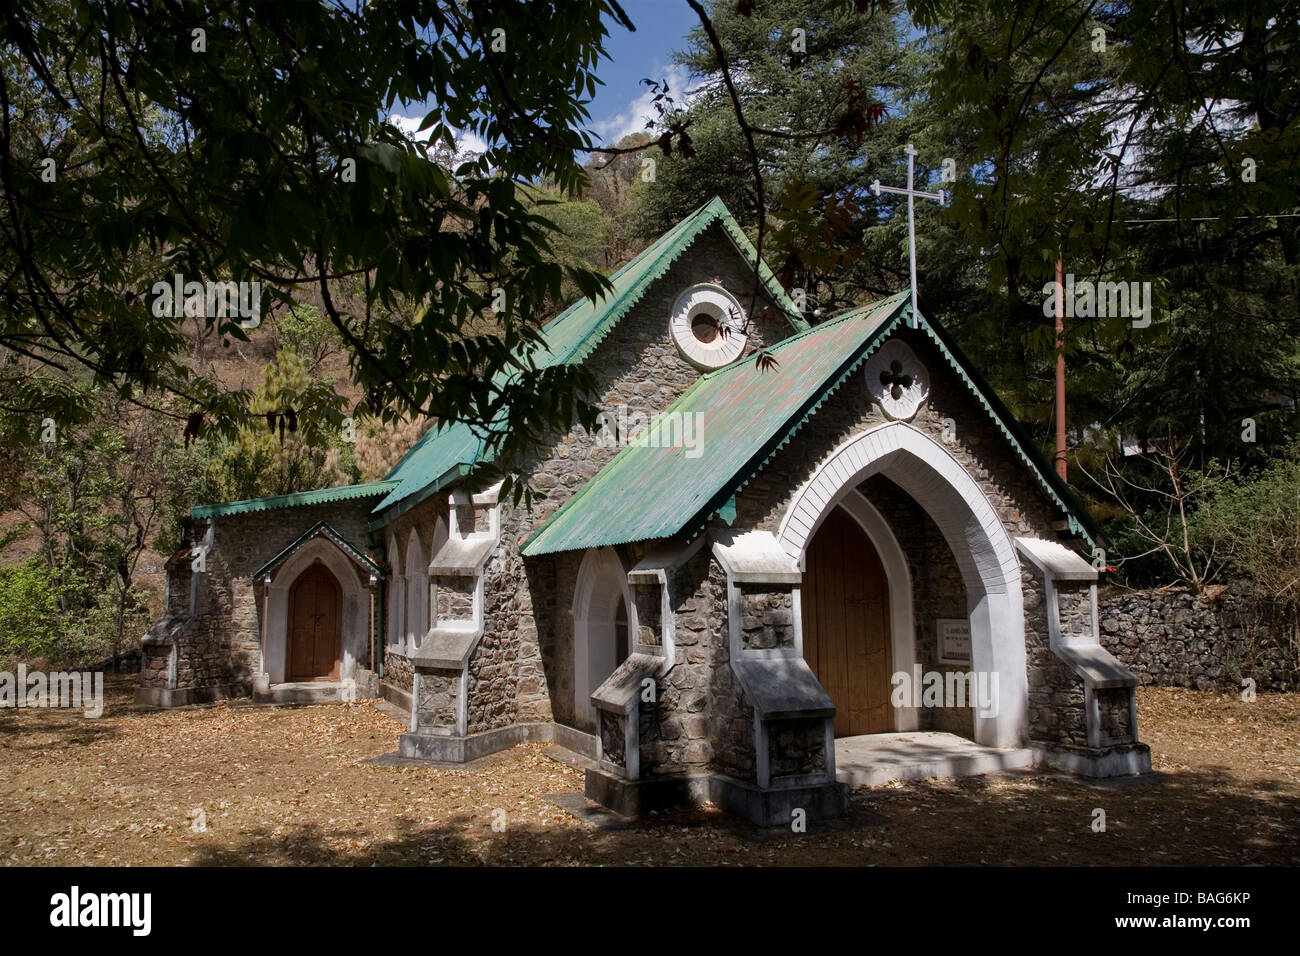 St. John Wilderness Church near Sattal Estate. Situated in the Lower Himalayan Range near Bhimtal, a town of the Nainital district. Uttarakhand. Stock Photo